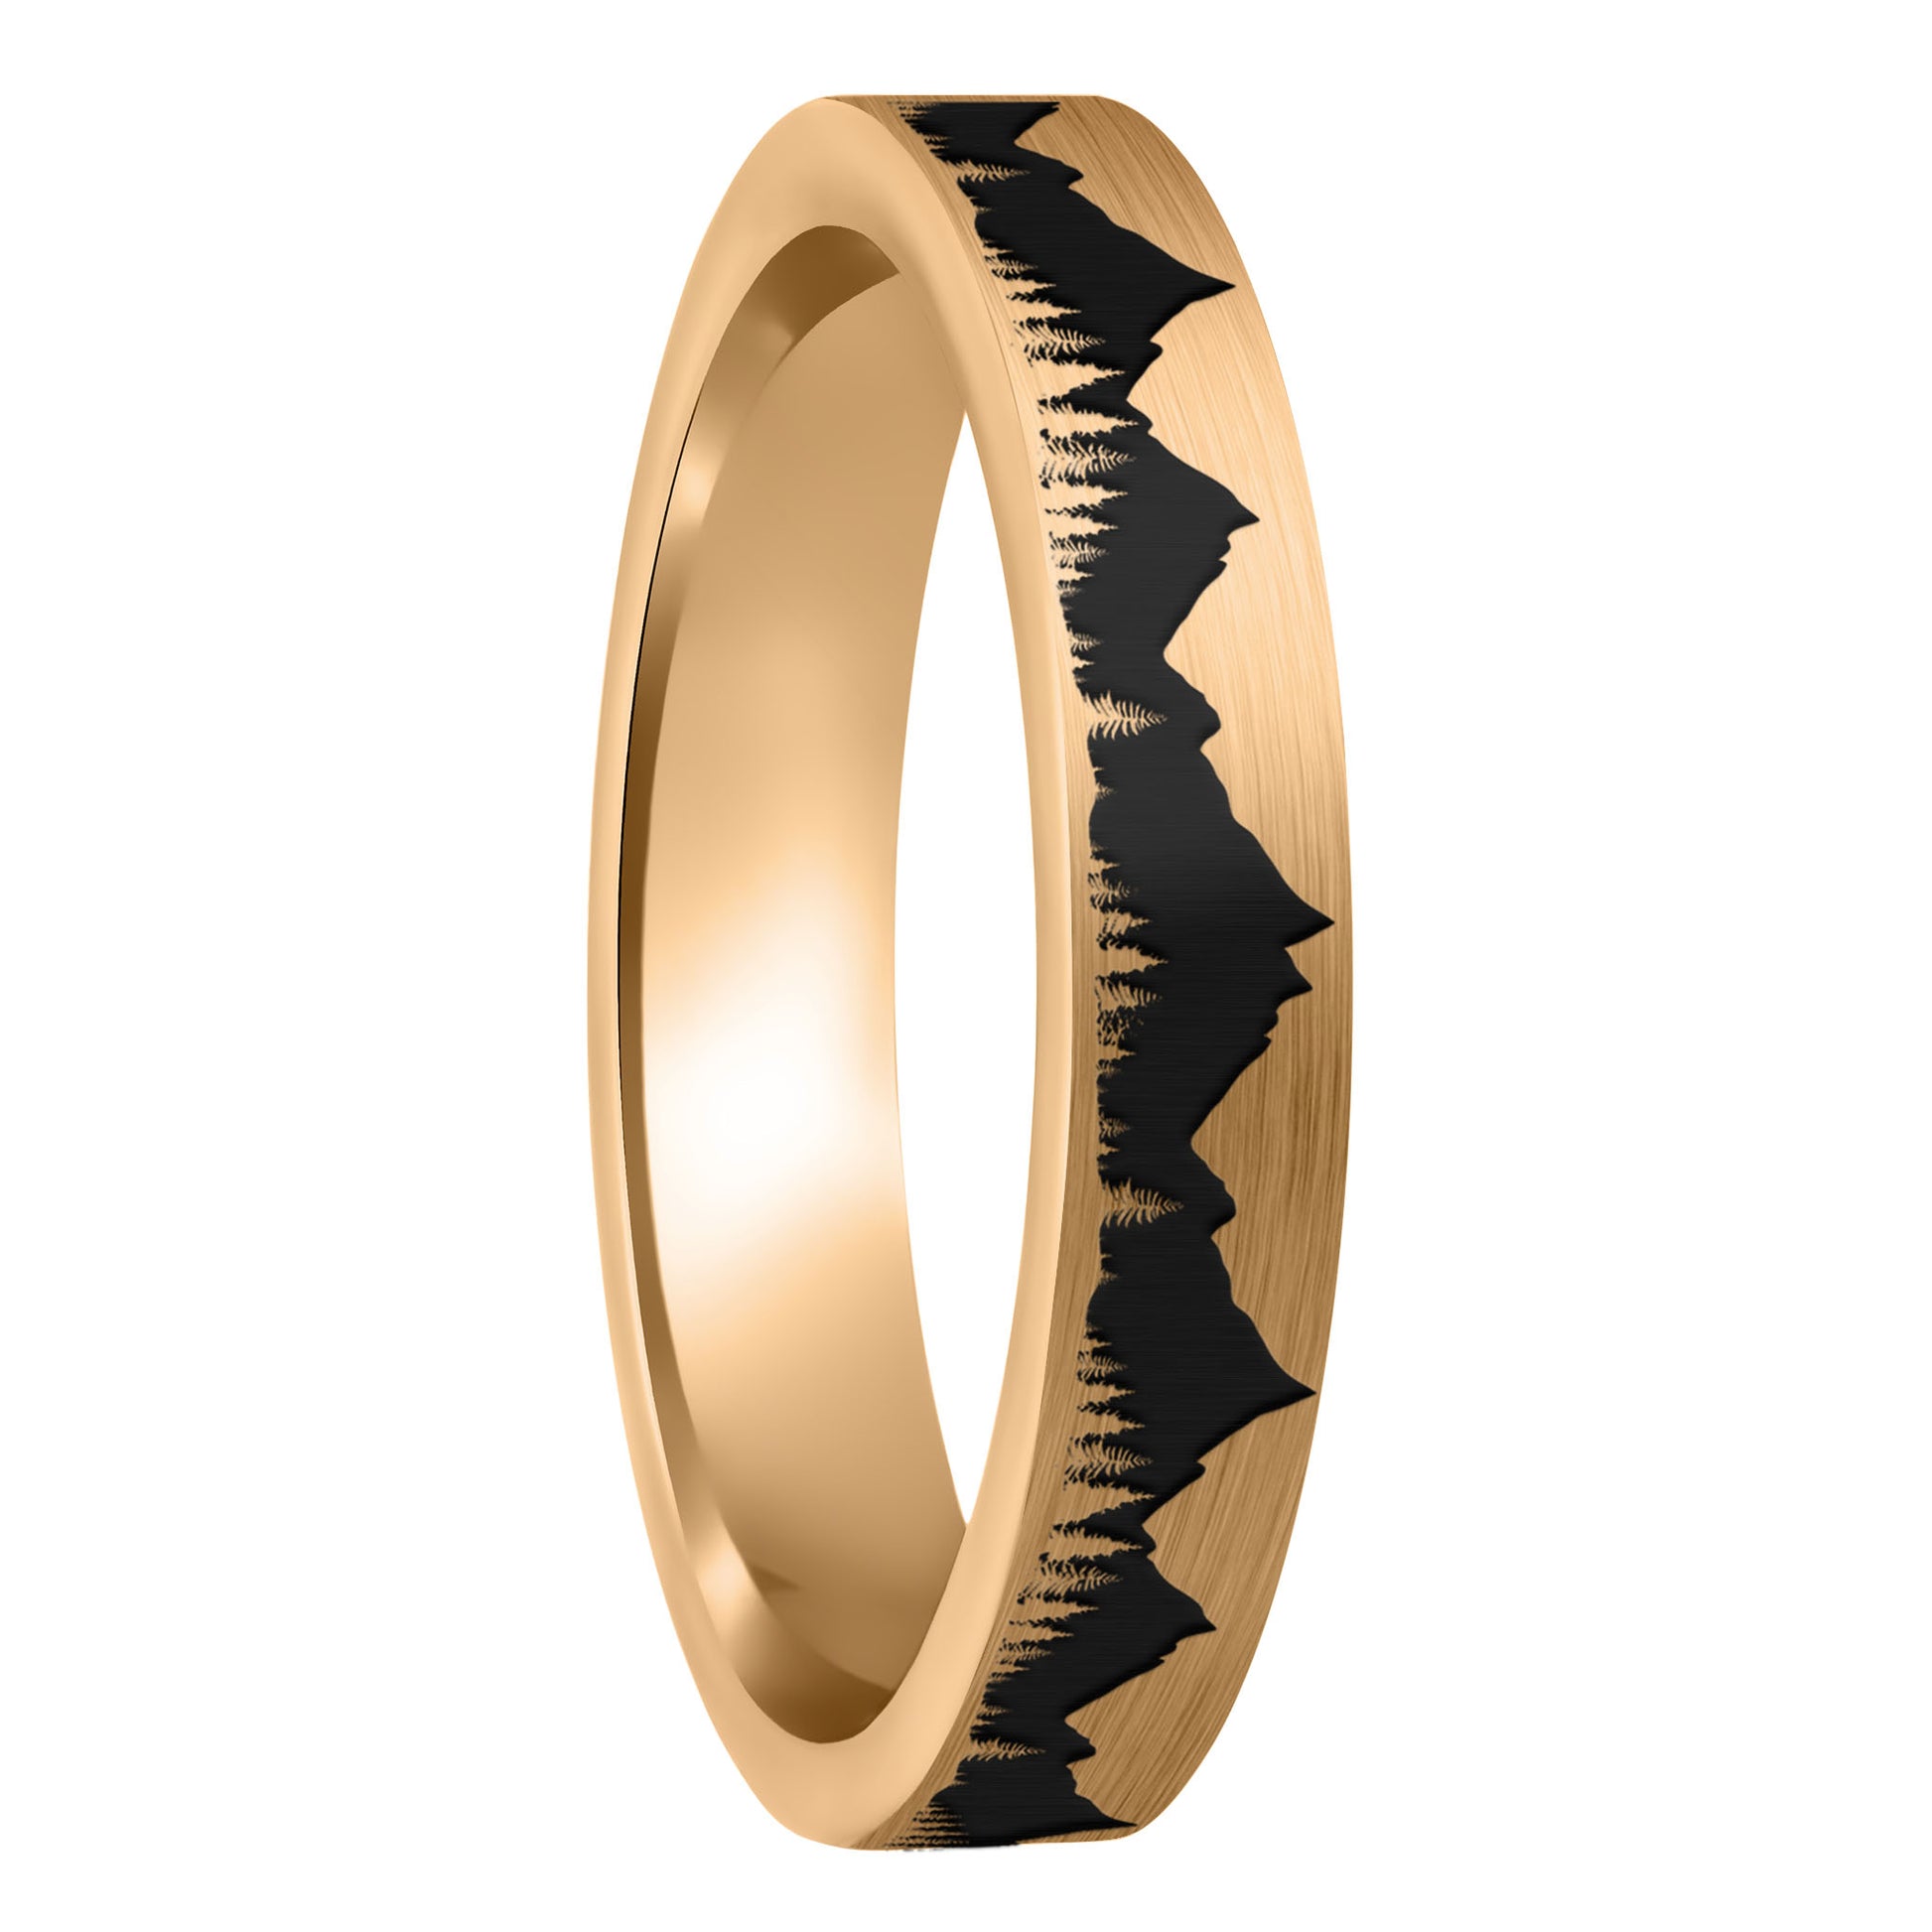 A treeline mountains brushed rose gold tungsten women's wedding band displayed on a plain white background.